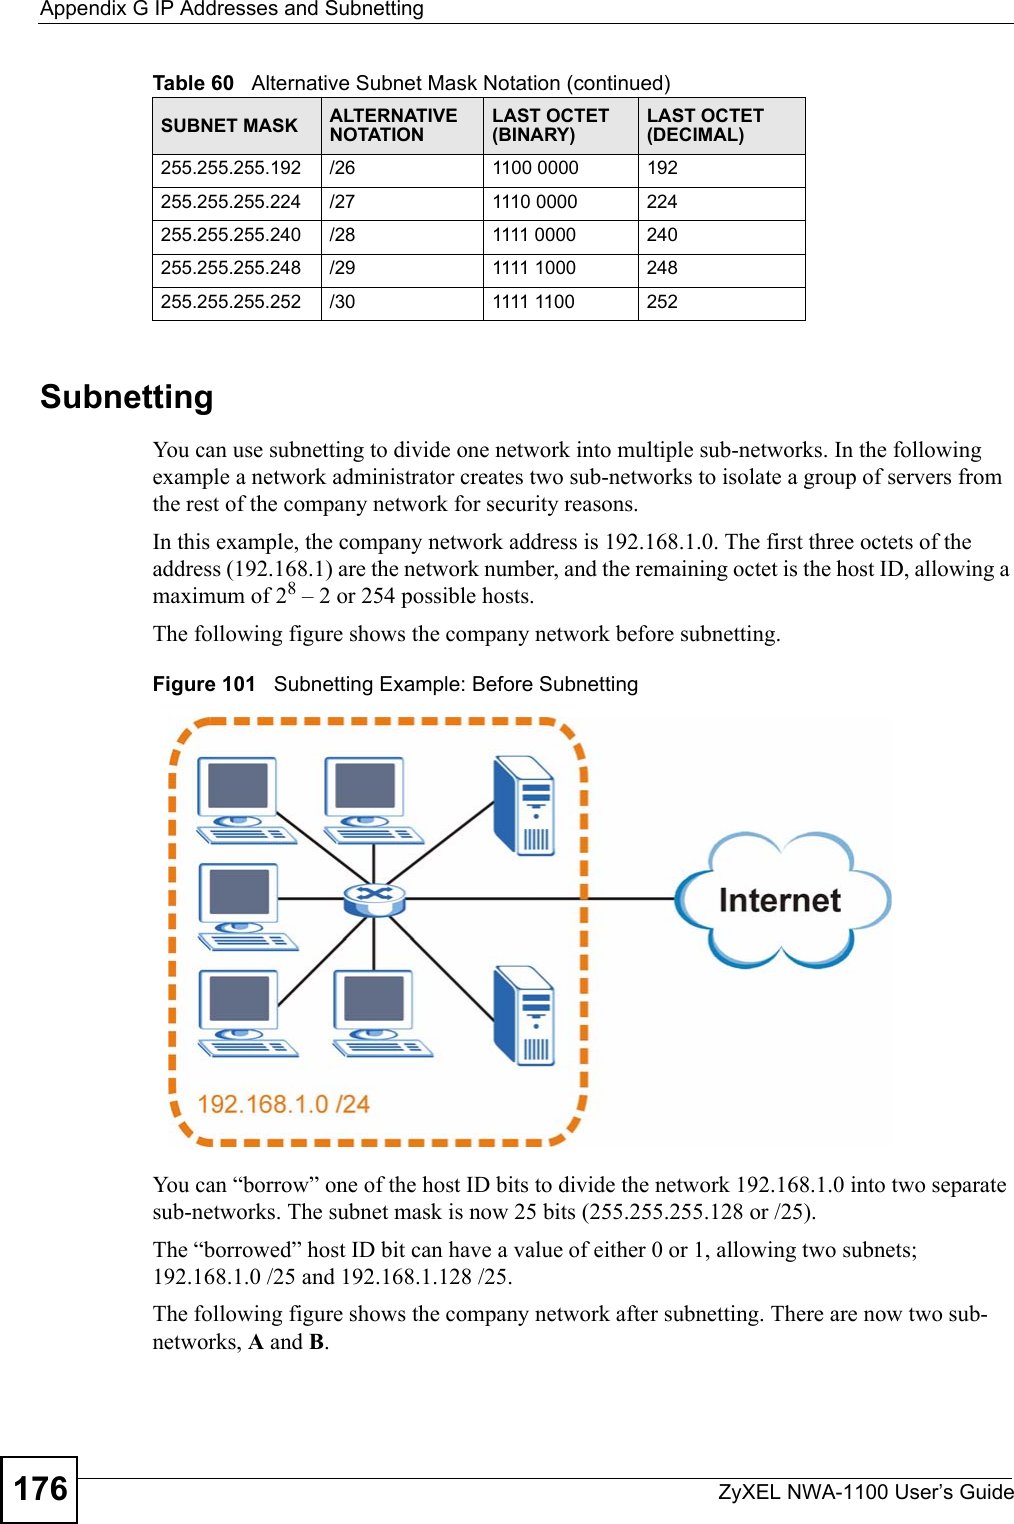 Appendix G IP Addresses and SubnettingZyXEL NWA-1100 User’s Guide176SubnettingYou can use subnetting to divide one network into multiple sub-networks. In the following example a network administrator creates two sub-networks to isolate a group of servers from the rest of the company network for security reasons.In this example, the company network address is 192.168.1.0. The first three octets of the address (192.168.1) are the network number, and the remaining octet is the host ID, allowing a maximum of 28 – 2 or 254 possible hosts.The following figure shows the company network before subnetting.  Figure 101   Subnetting Example: Before SubnettingYou can “borrow” one of the host ID bits to divide the network 192.168.1.0 into two separate sub-networks. The subnet mask is now 25 bits (255.255.255.128 or /25).The “borrowed” host ID bit can have a value of either 0 or 1, allowing two subnets; 192.168.1.0 /25 and 192.168.1.128 /25. The following figure shows the company network after subnetting. There are now two sub-networks, A and B. 255.255.255.192 /26 1100 0000 192255.255.255.224 /27 1110 0000 224255.255.255.240 /28 1111 0000 240255.255.255.248 /29 1111 1000 248255.255.255.252 /30 1111 1100 252Table 60   Alternative Subnet Mask Notation (continued)SUBNET MASK ALTERNATIVE NOTATIONLAST OCTET (BINARY)LAST OCTET (DECIMAL)